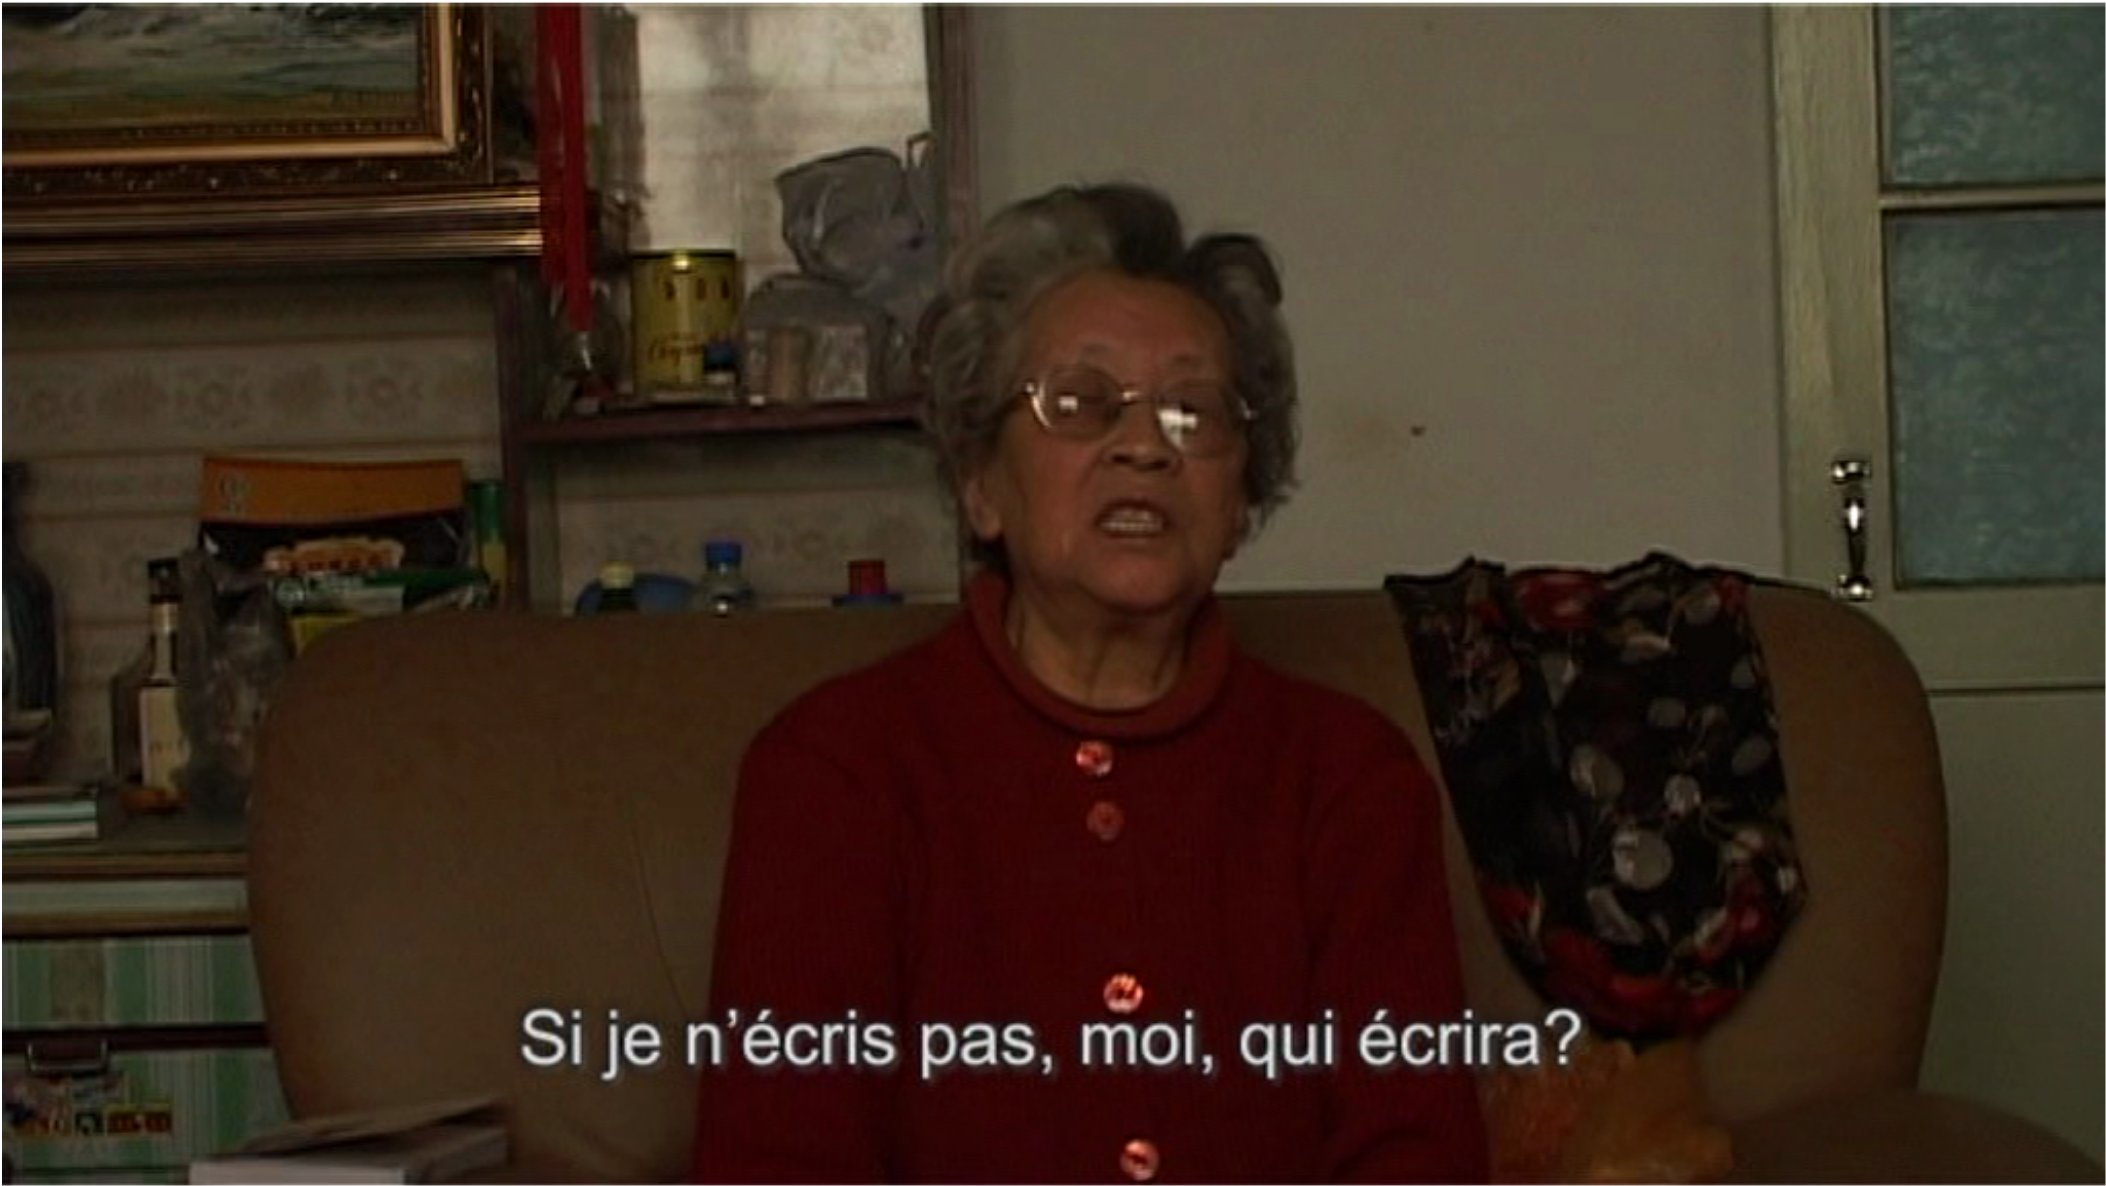 Fengming, Chronique d'une femme chinoise (Wang Bing, 2007).